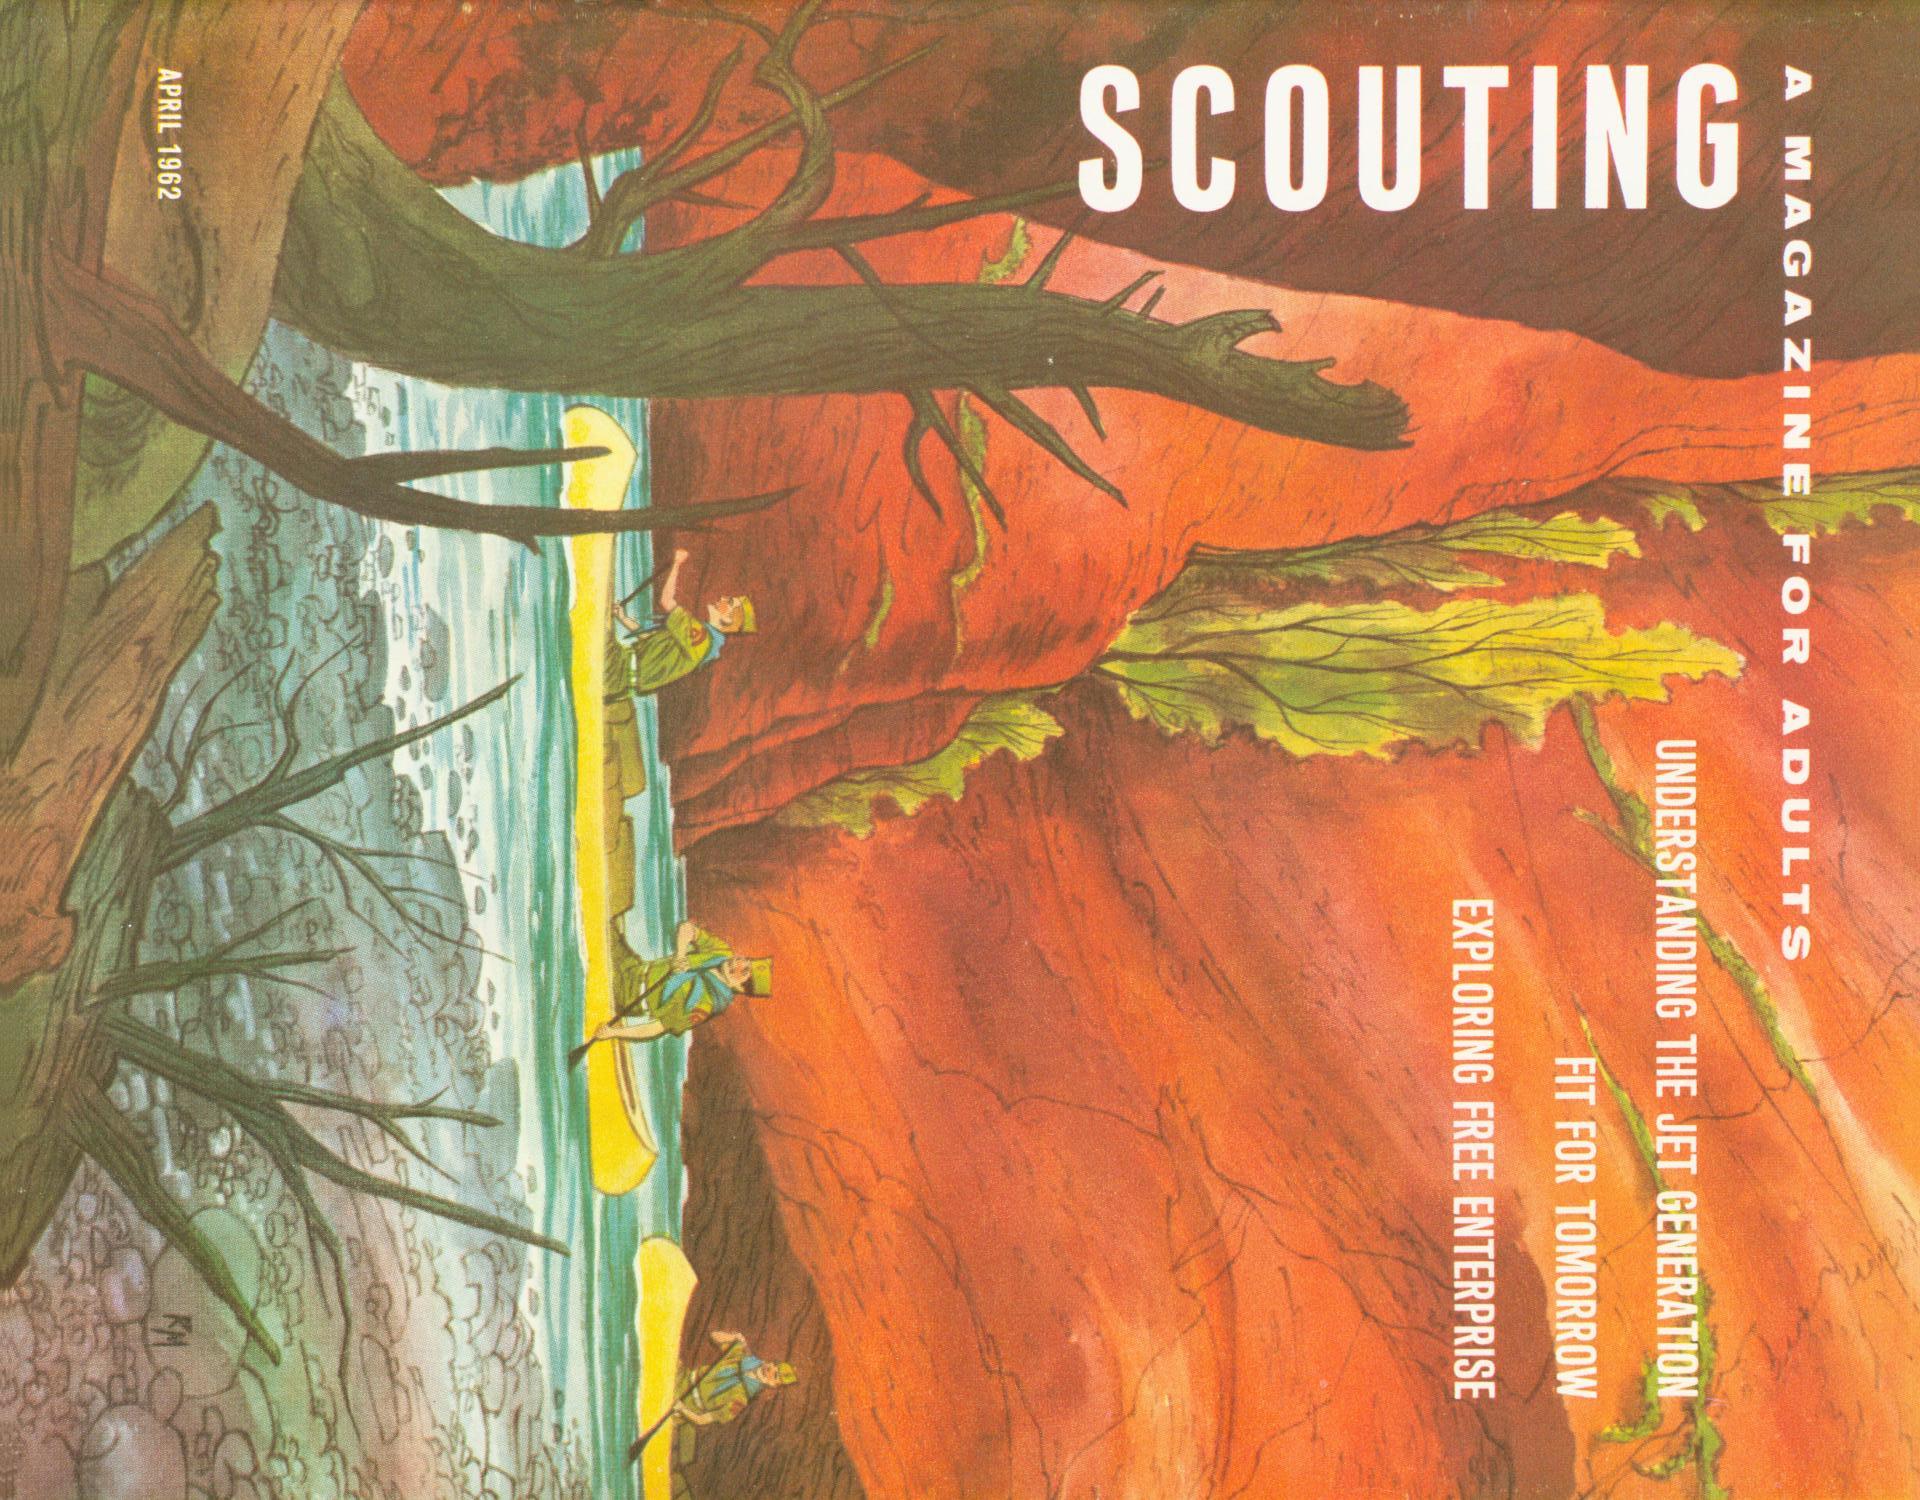 Scouting, Volume 50, Number 4, April 1962
                                                
                                                    Front Cover
                                                